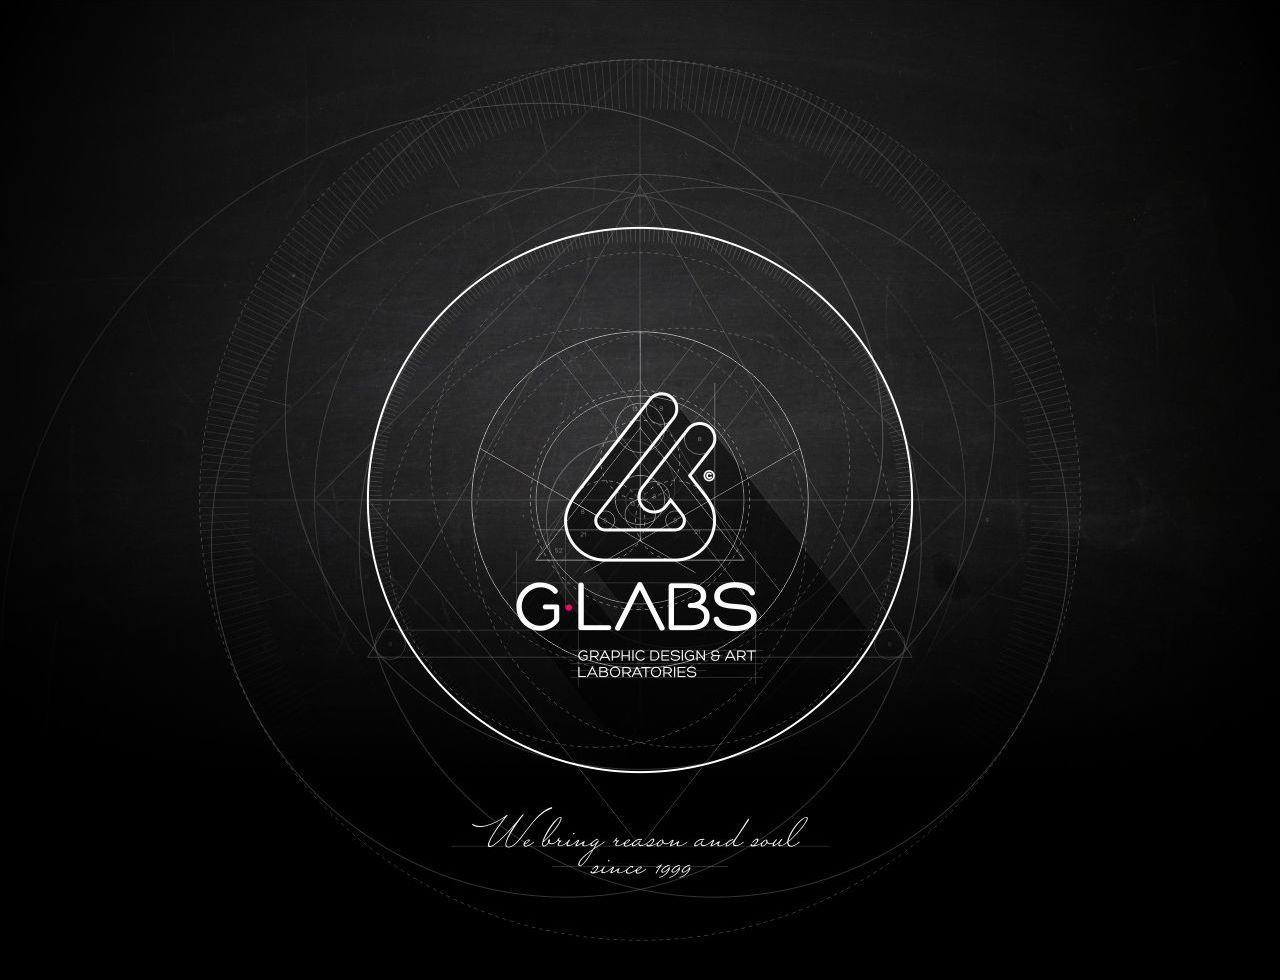 G-LABS - Graphic Design & Art Laboratories - We bring reason and soul, since 1999